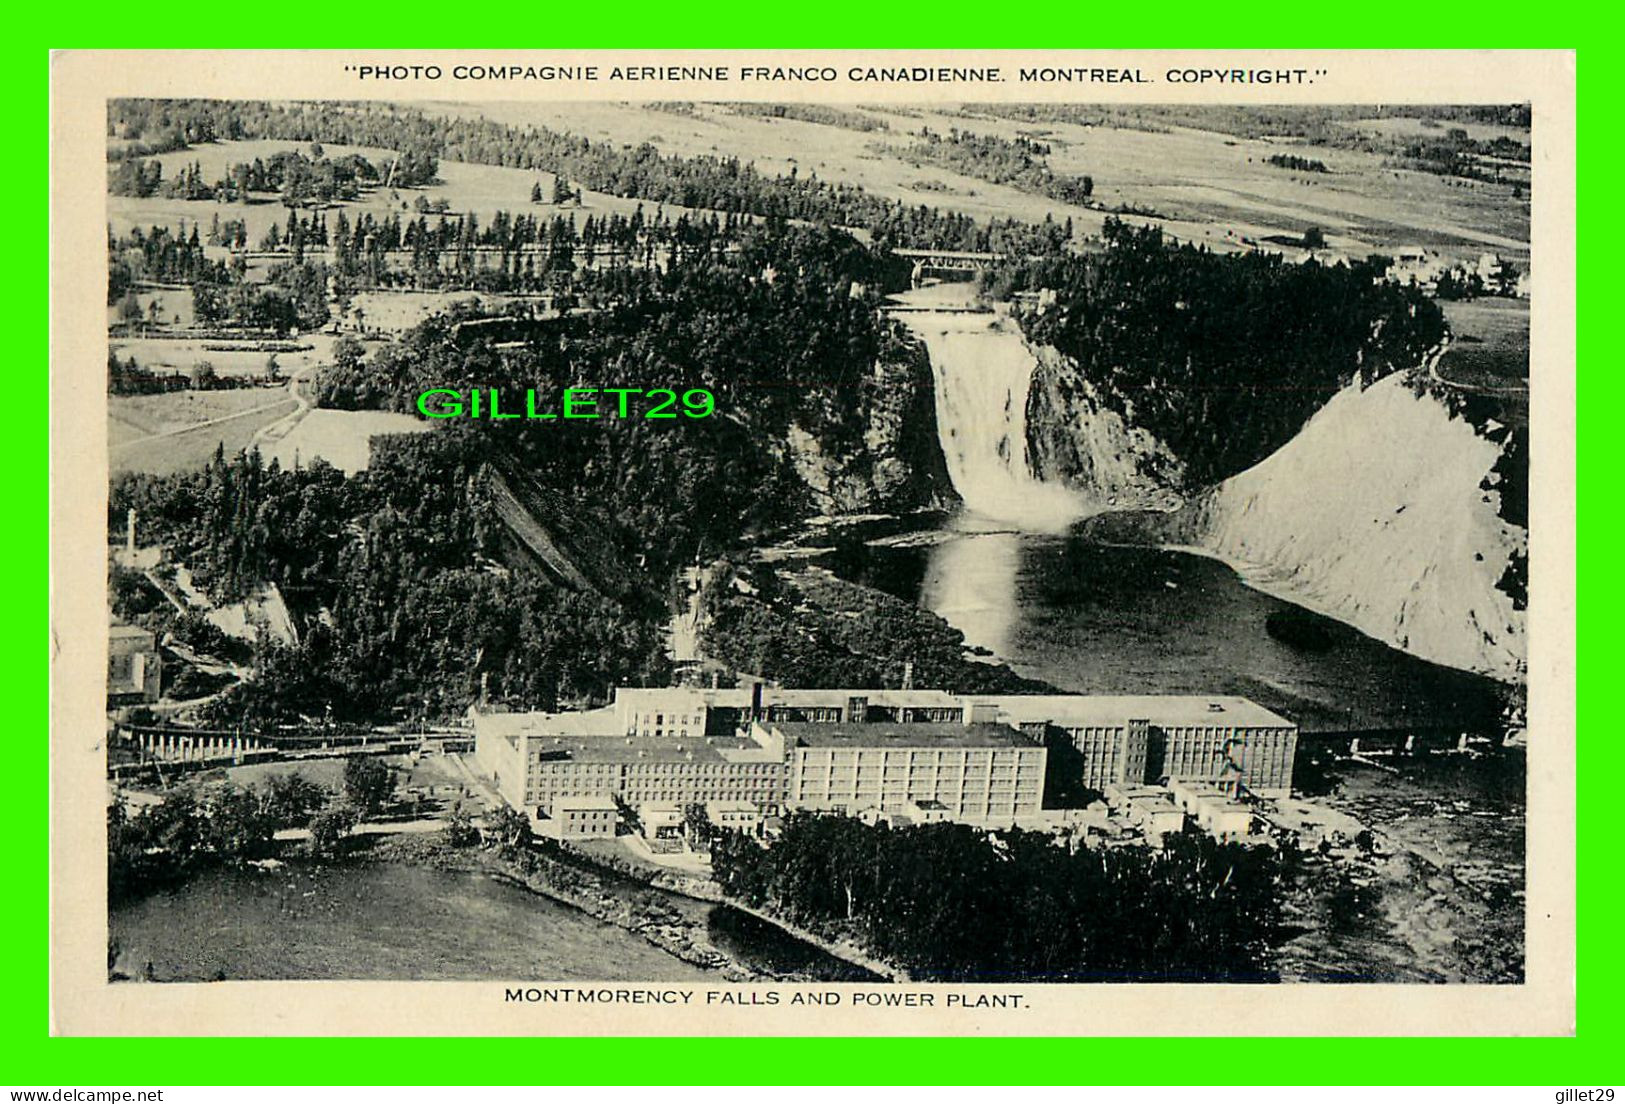 MONTMORENCY, QUÉBEC - MONTMORENCY FALLS AND POWER PLANT - WRITTEN IN 1931 - PUB. BY S.J. HAYWARD - - Chutes Montmorency